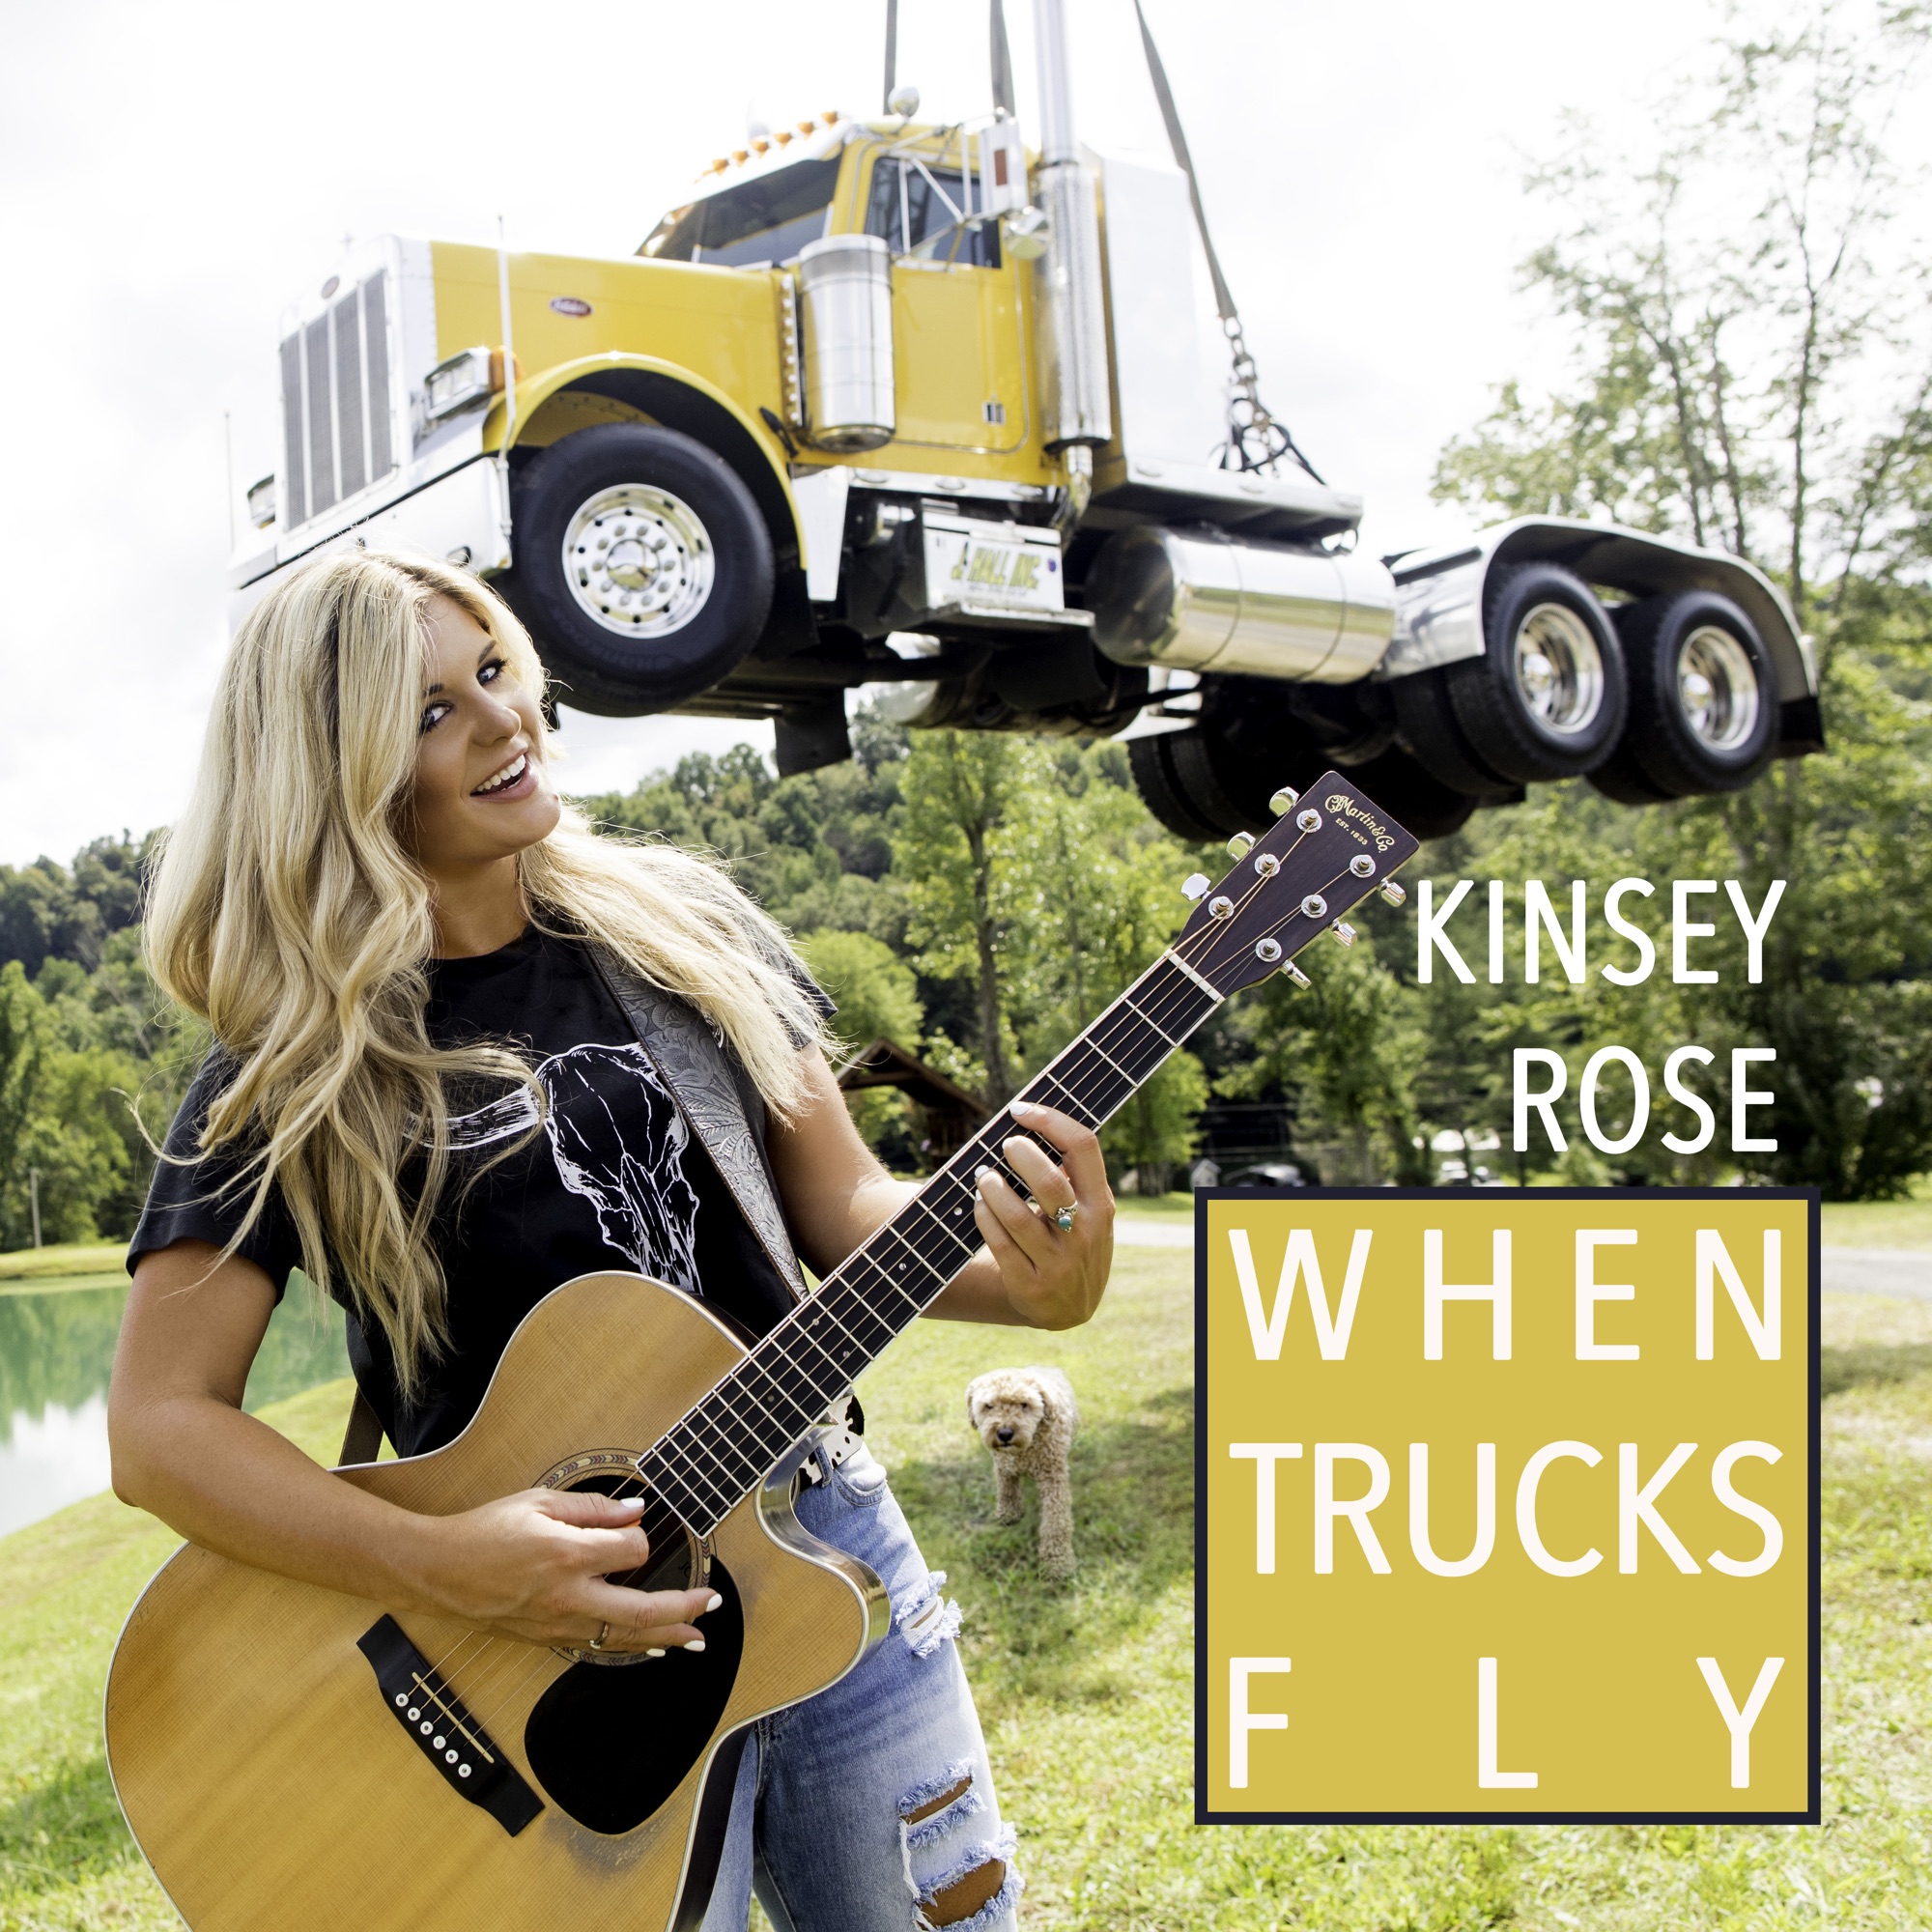 Art for When Trucks Fly by Kinsey Rose